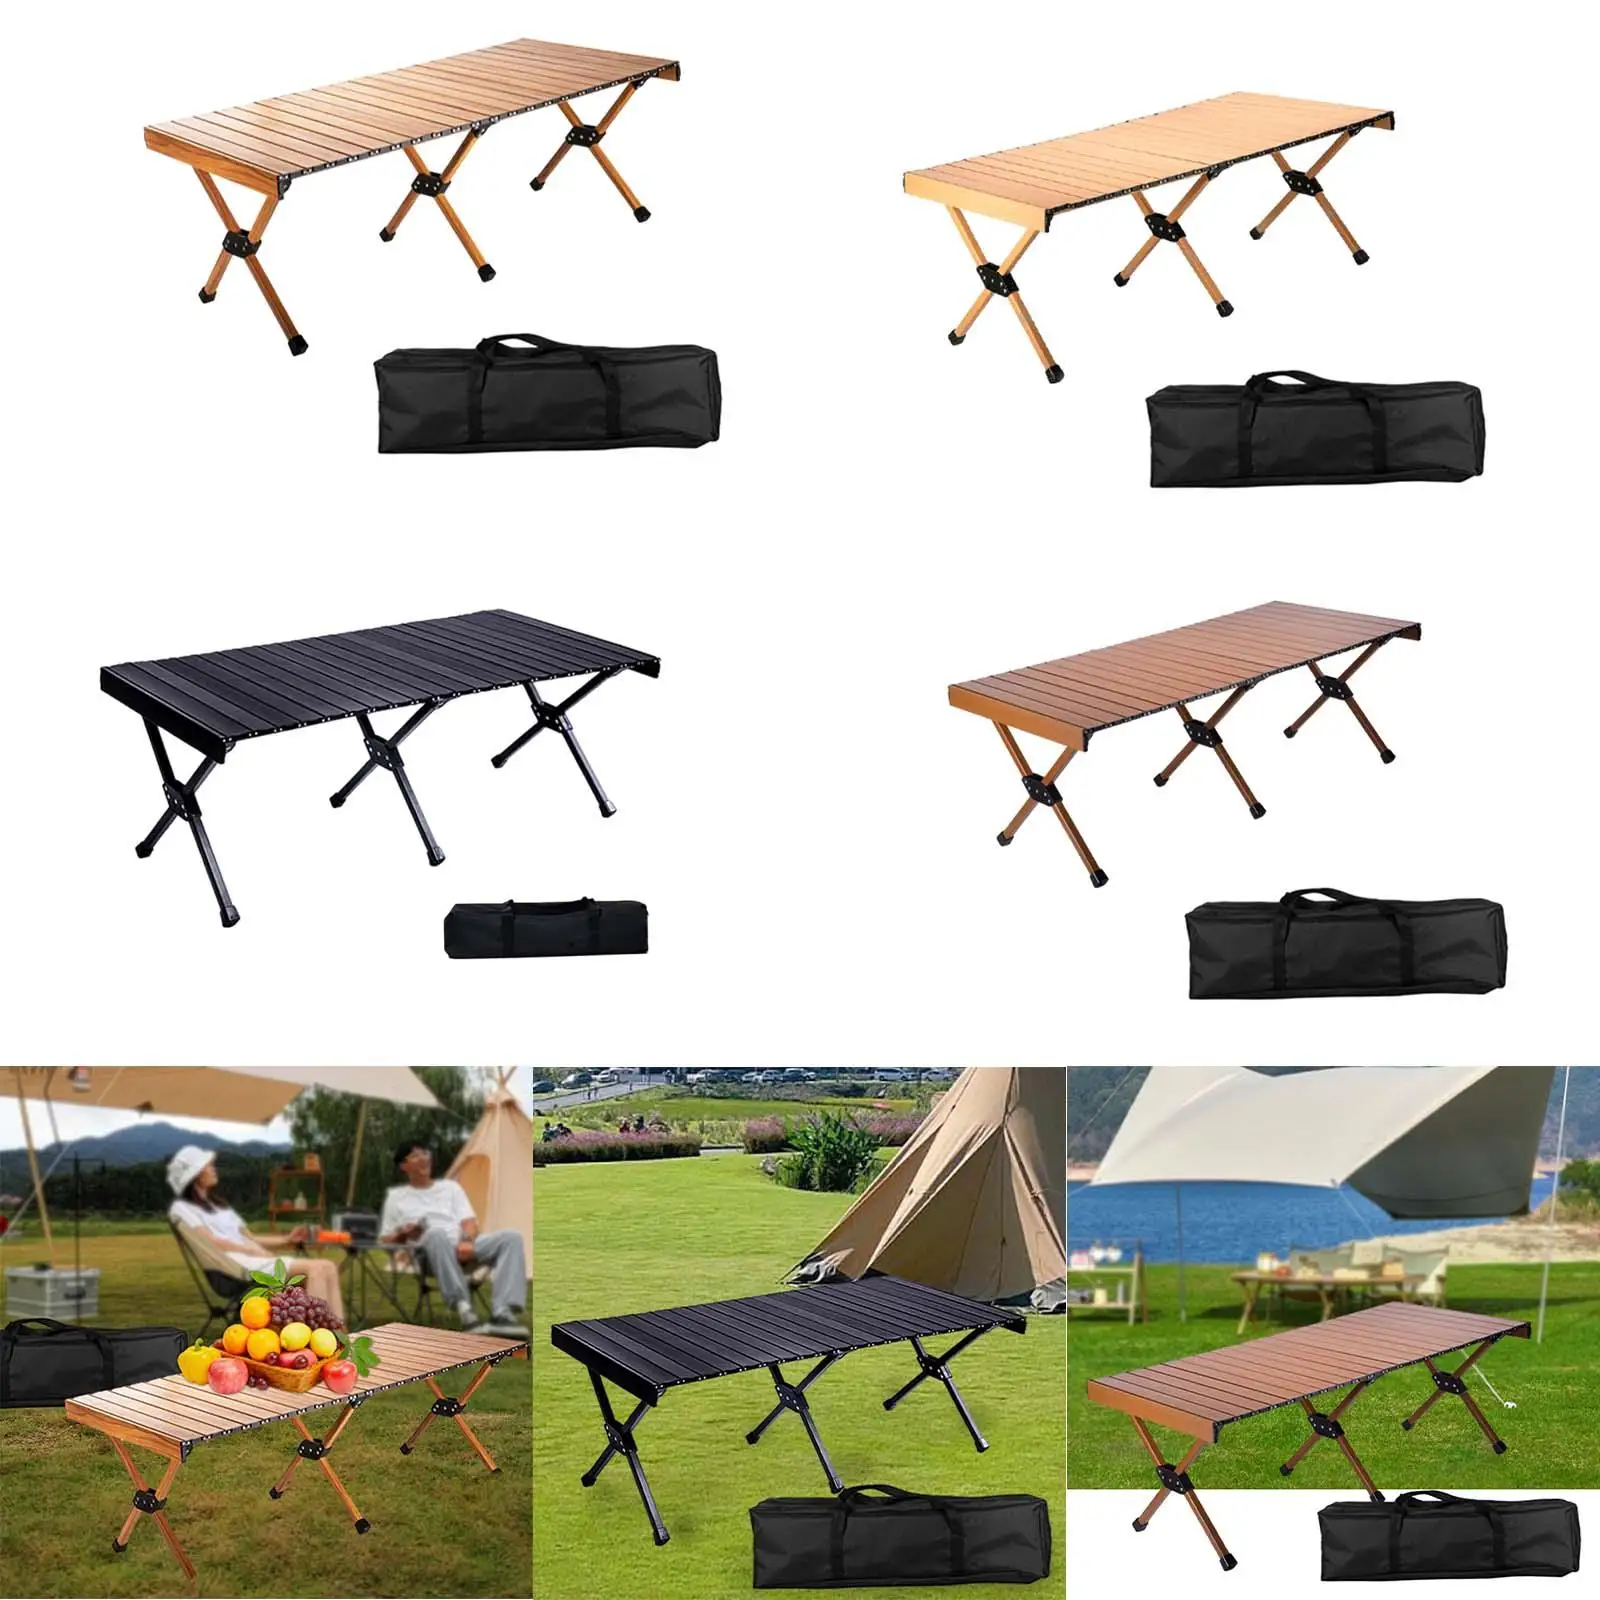 Camping Folding Table Furniture Aluminum Table Portable with Carry Bag Picnic Table for Outdoor Indoor Beach Balcony Deck Picnic